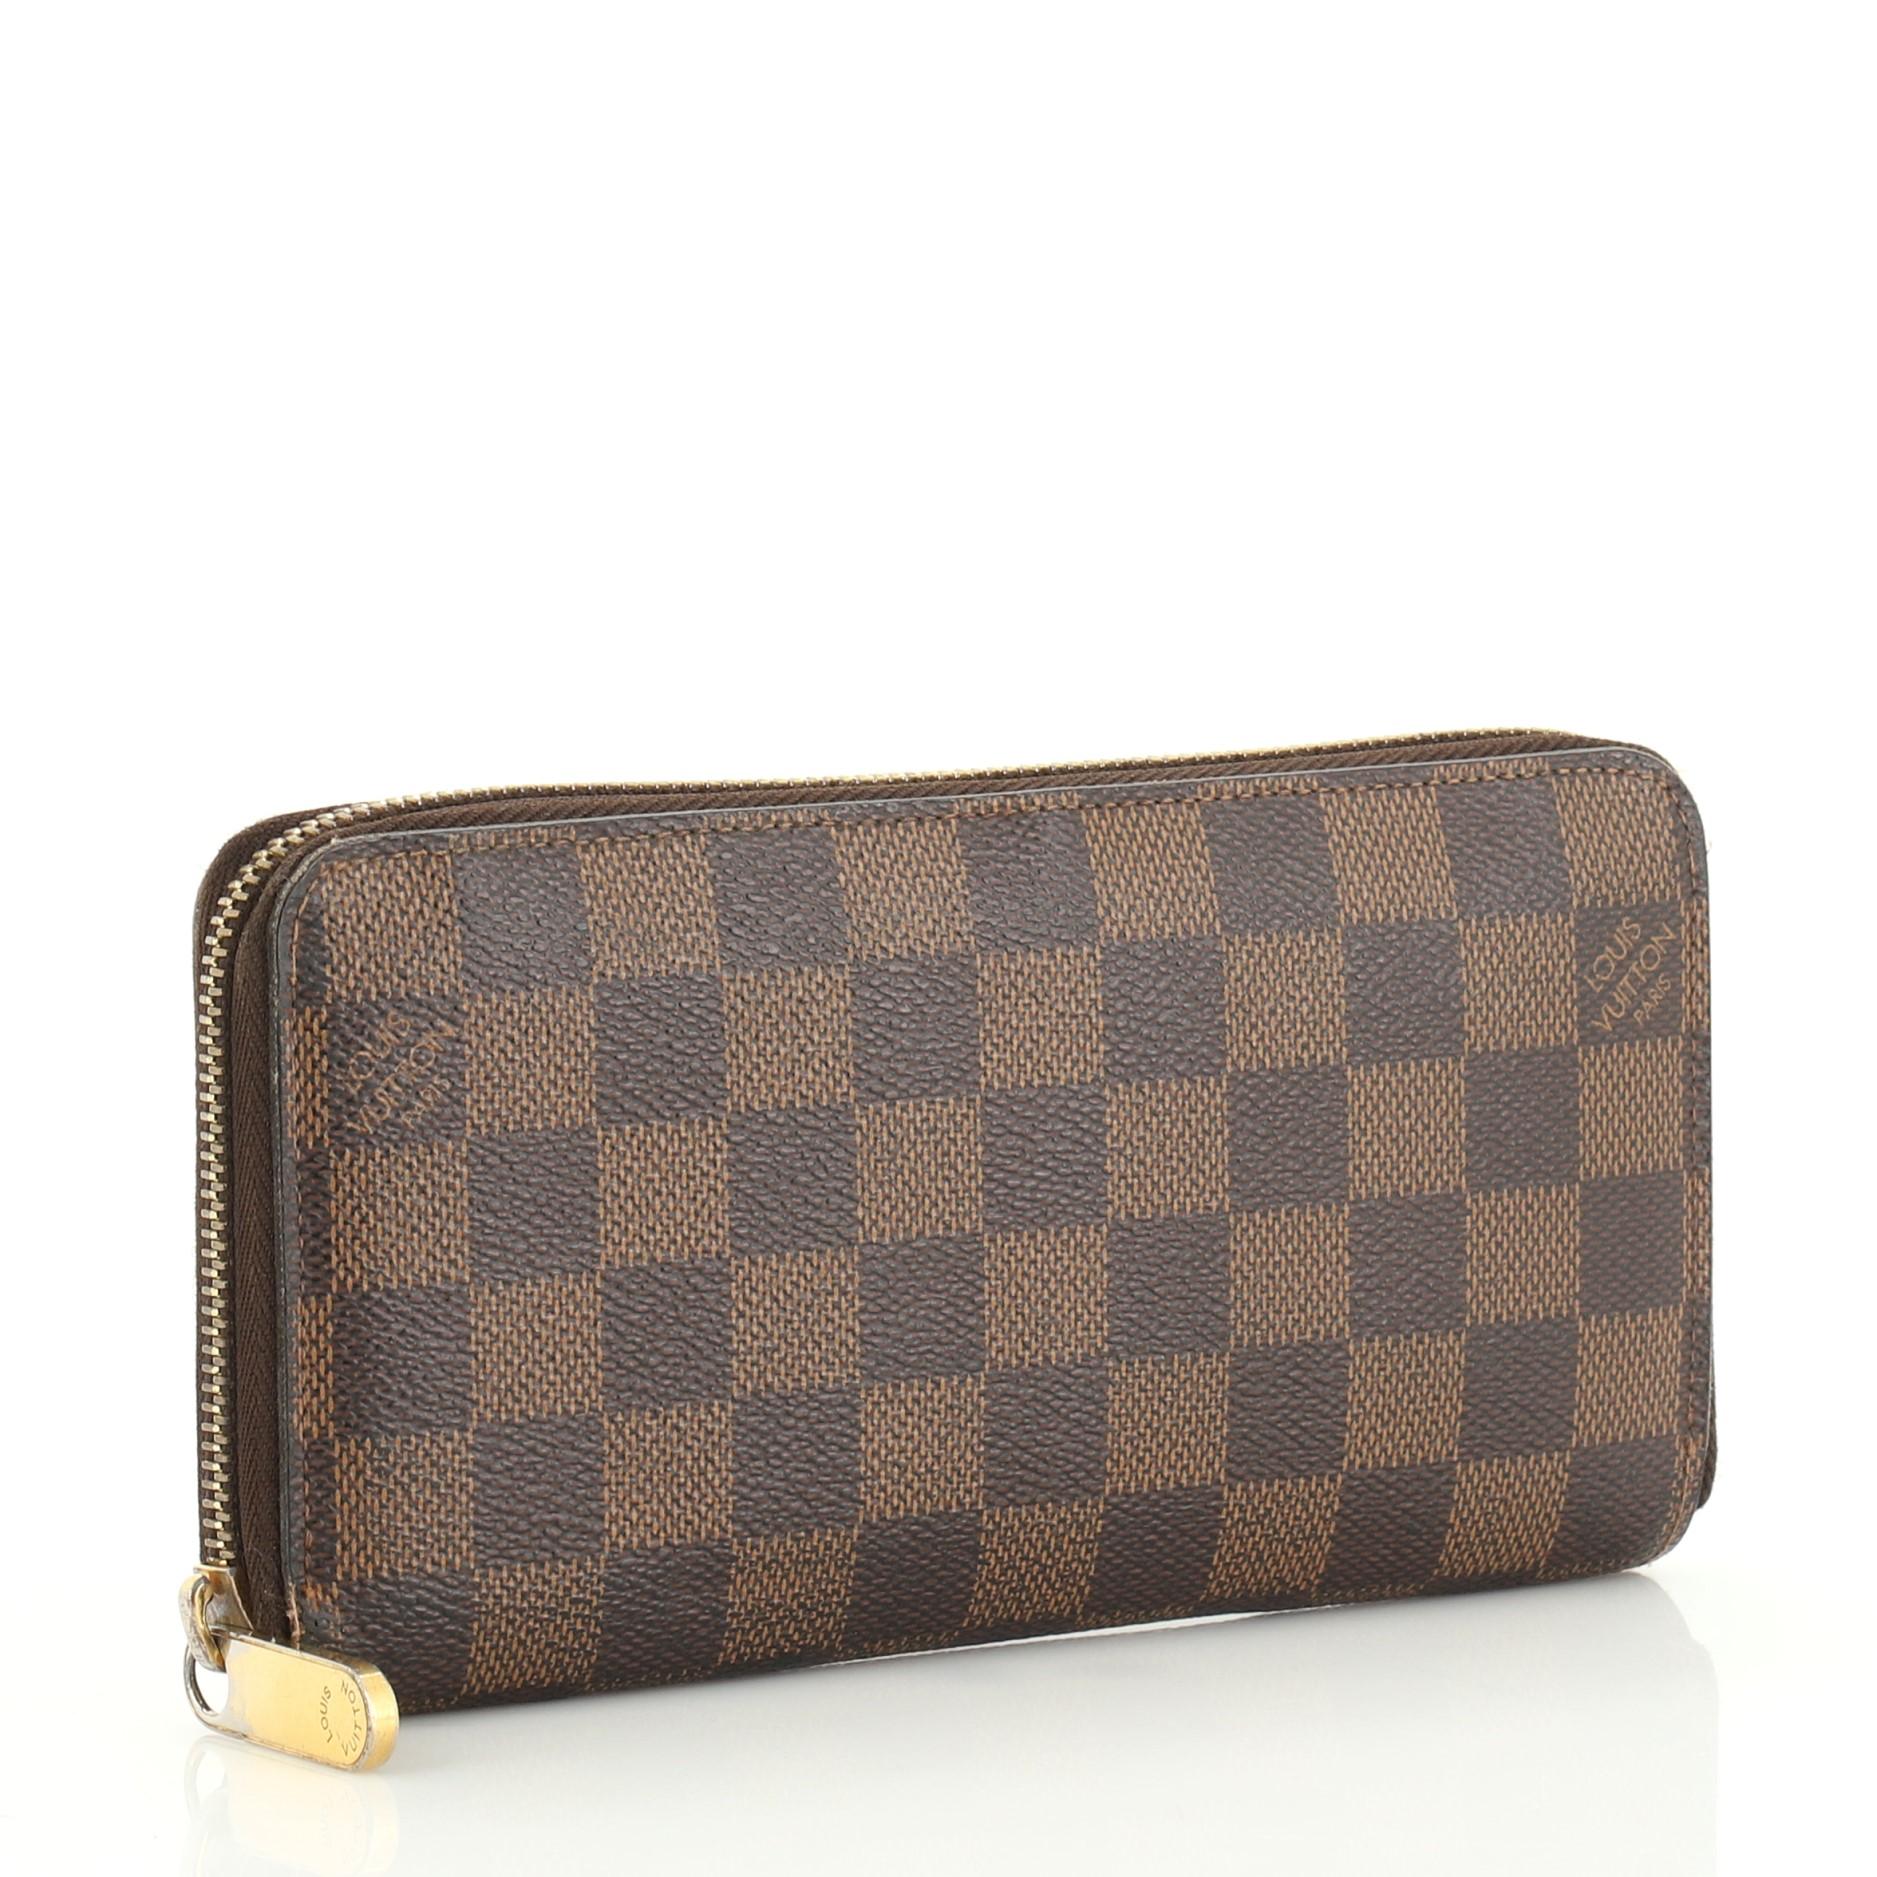 This Louis Vuitton Zippy Wallet Damier is an everyday piece with damier pattern introduced in 1888, from the French word which literally translates to Checker Board. Crafted from damier ebene coated canvas, it features gold-tone hardware. Its